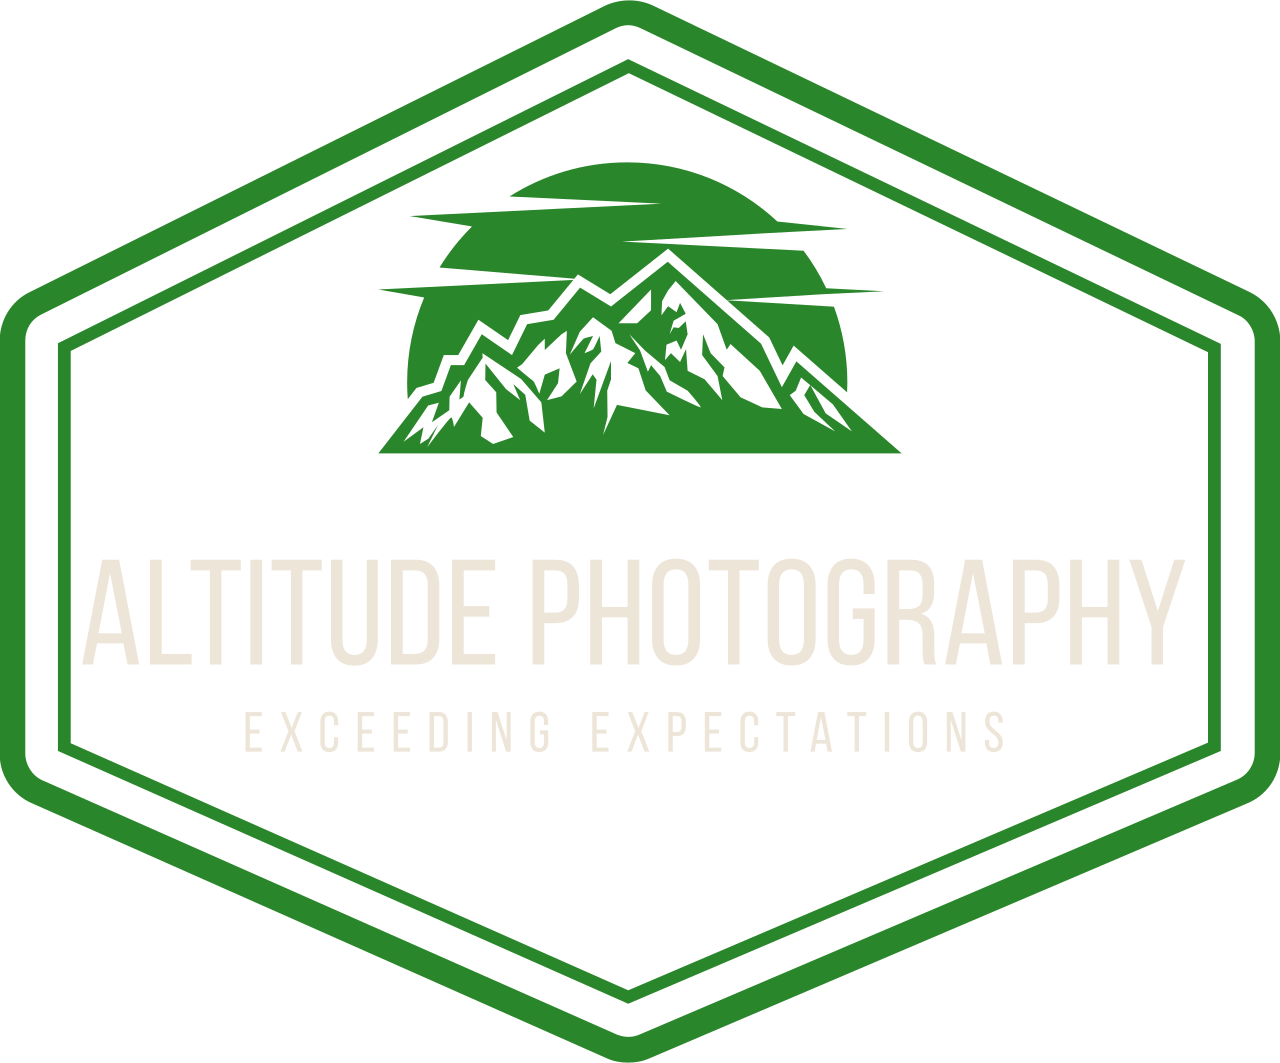 Altitude Photography's web page